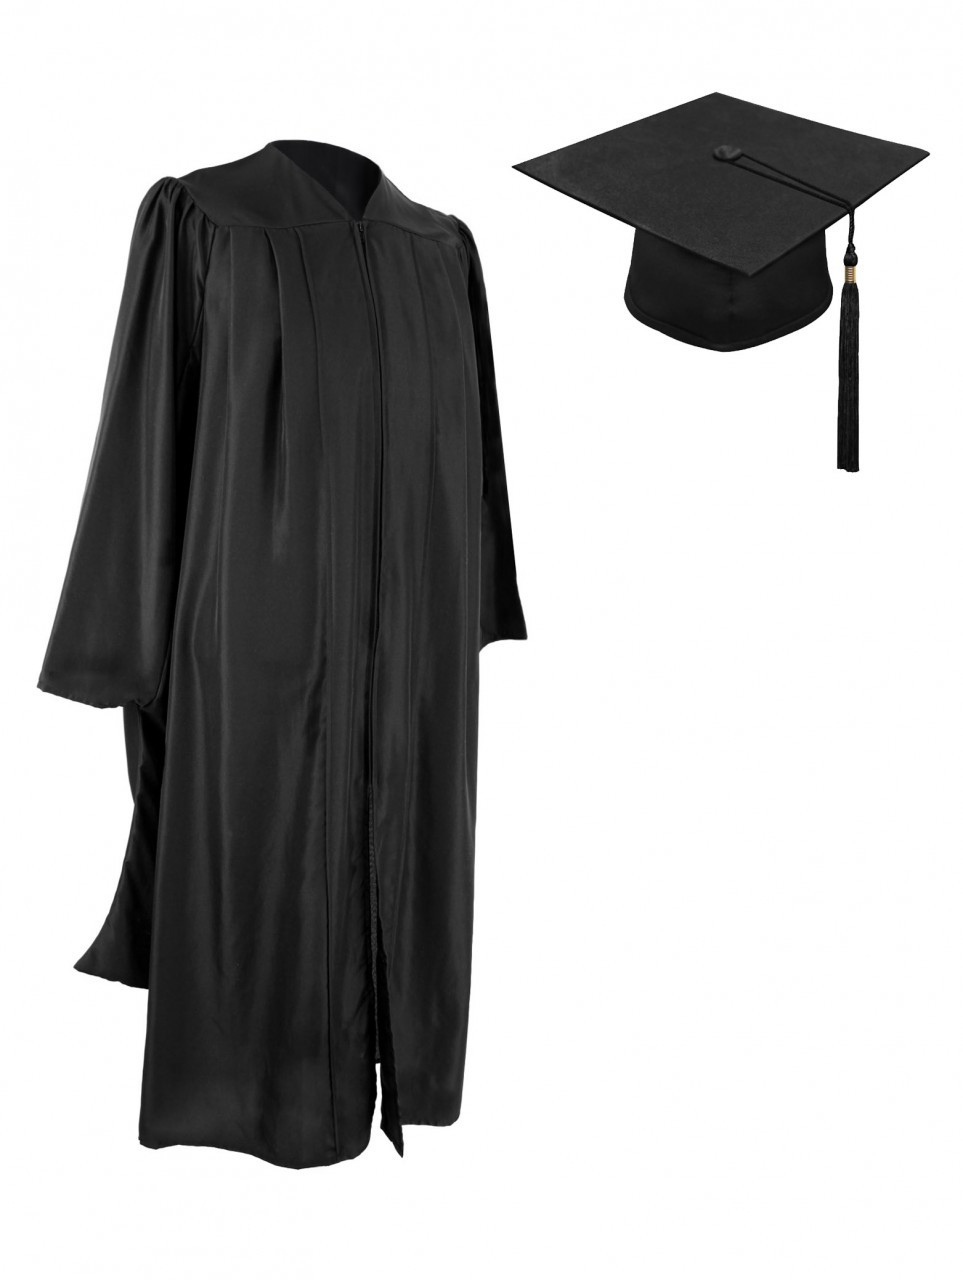 There's a shortage of graduation garb